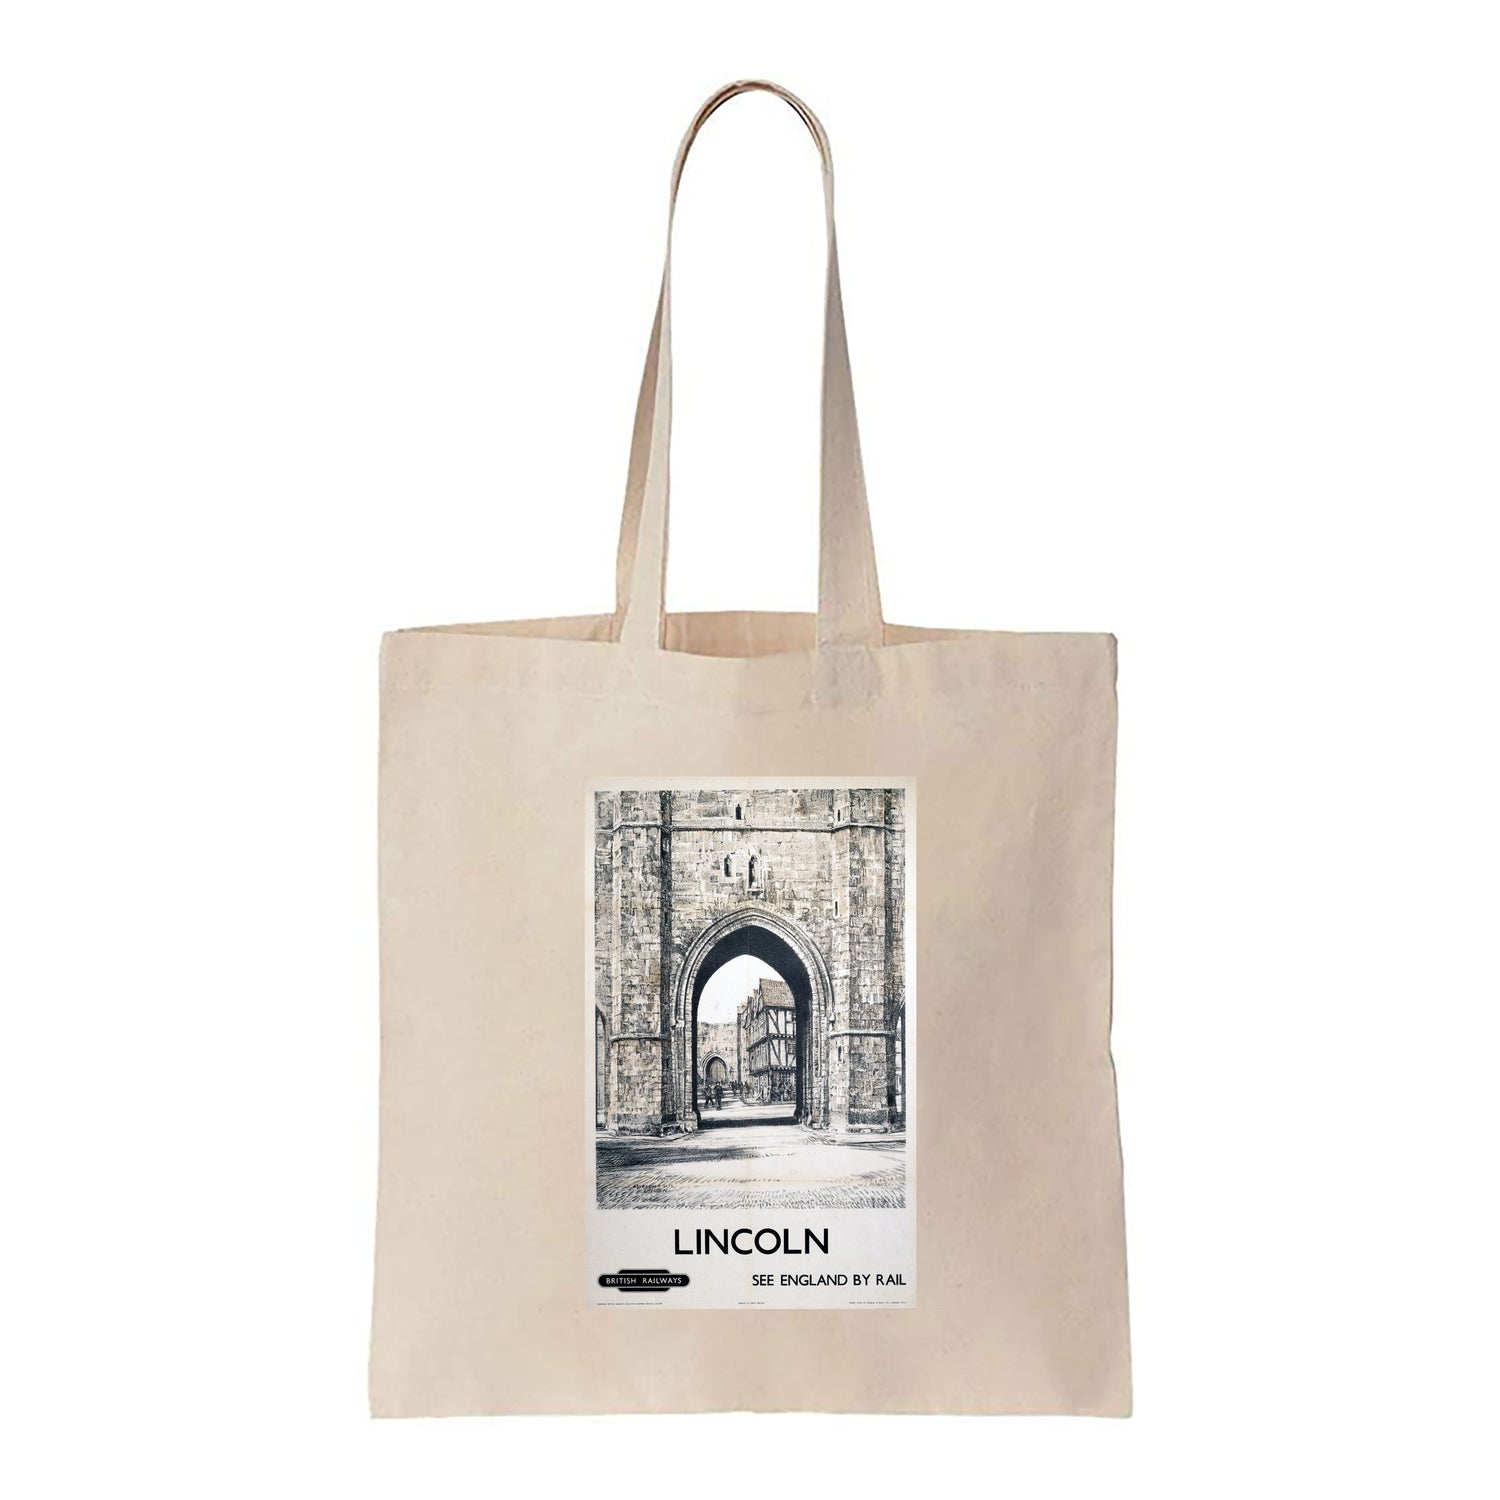 Lincoln See England by Rail - Canvas Tote Bag